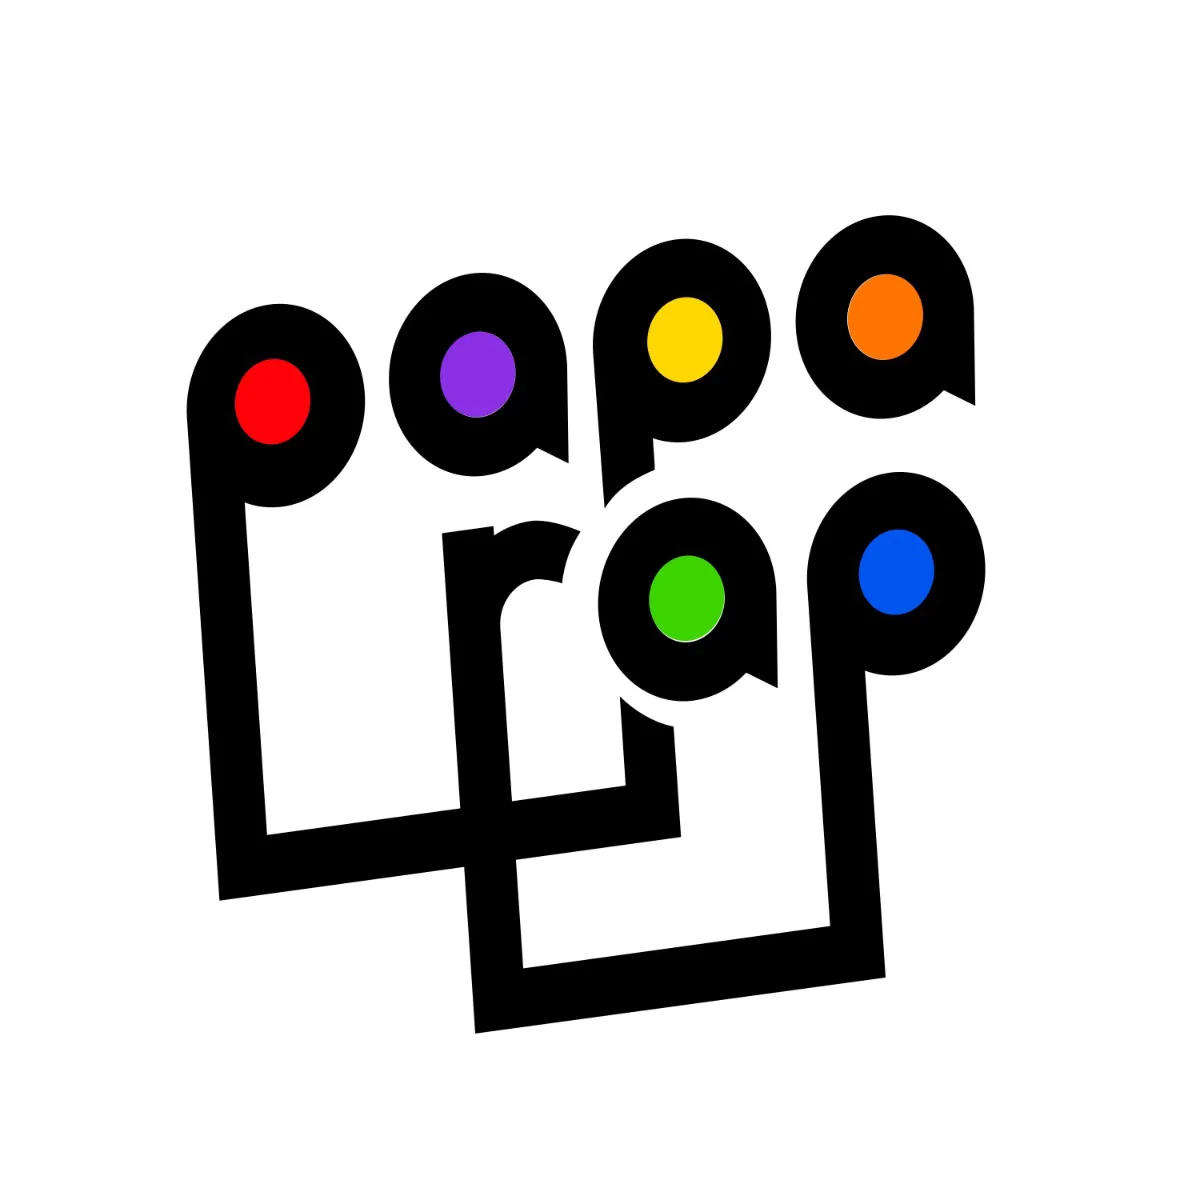 Papa Rap's logo, composed of upside down musical notes to form his name